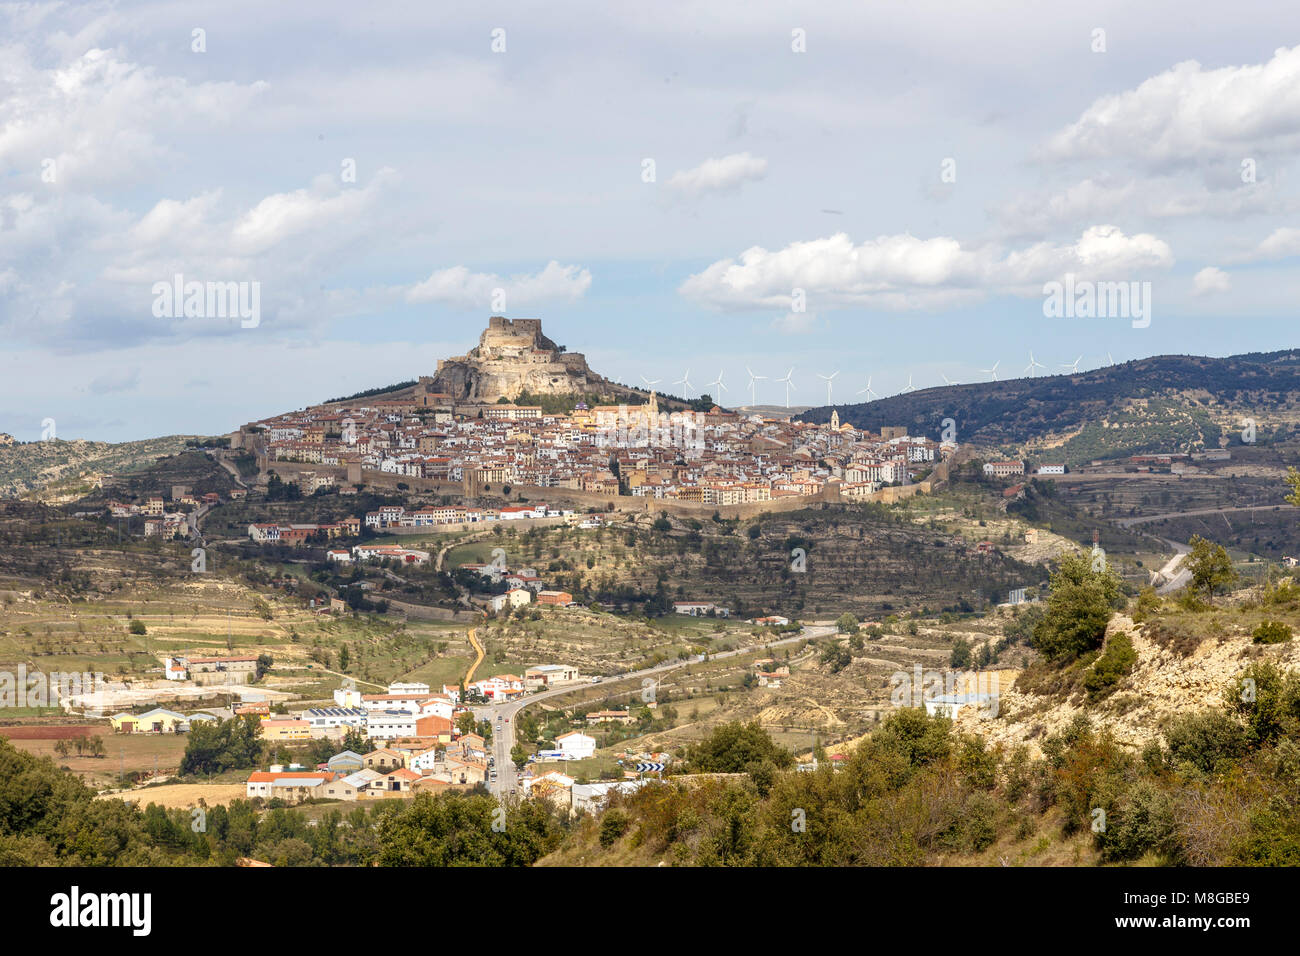 Morella is an ancient walled city located on a hill-top in the province of Castellón, Valencian Community, Spain. Stock Photo